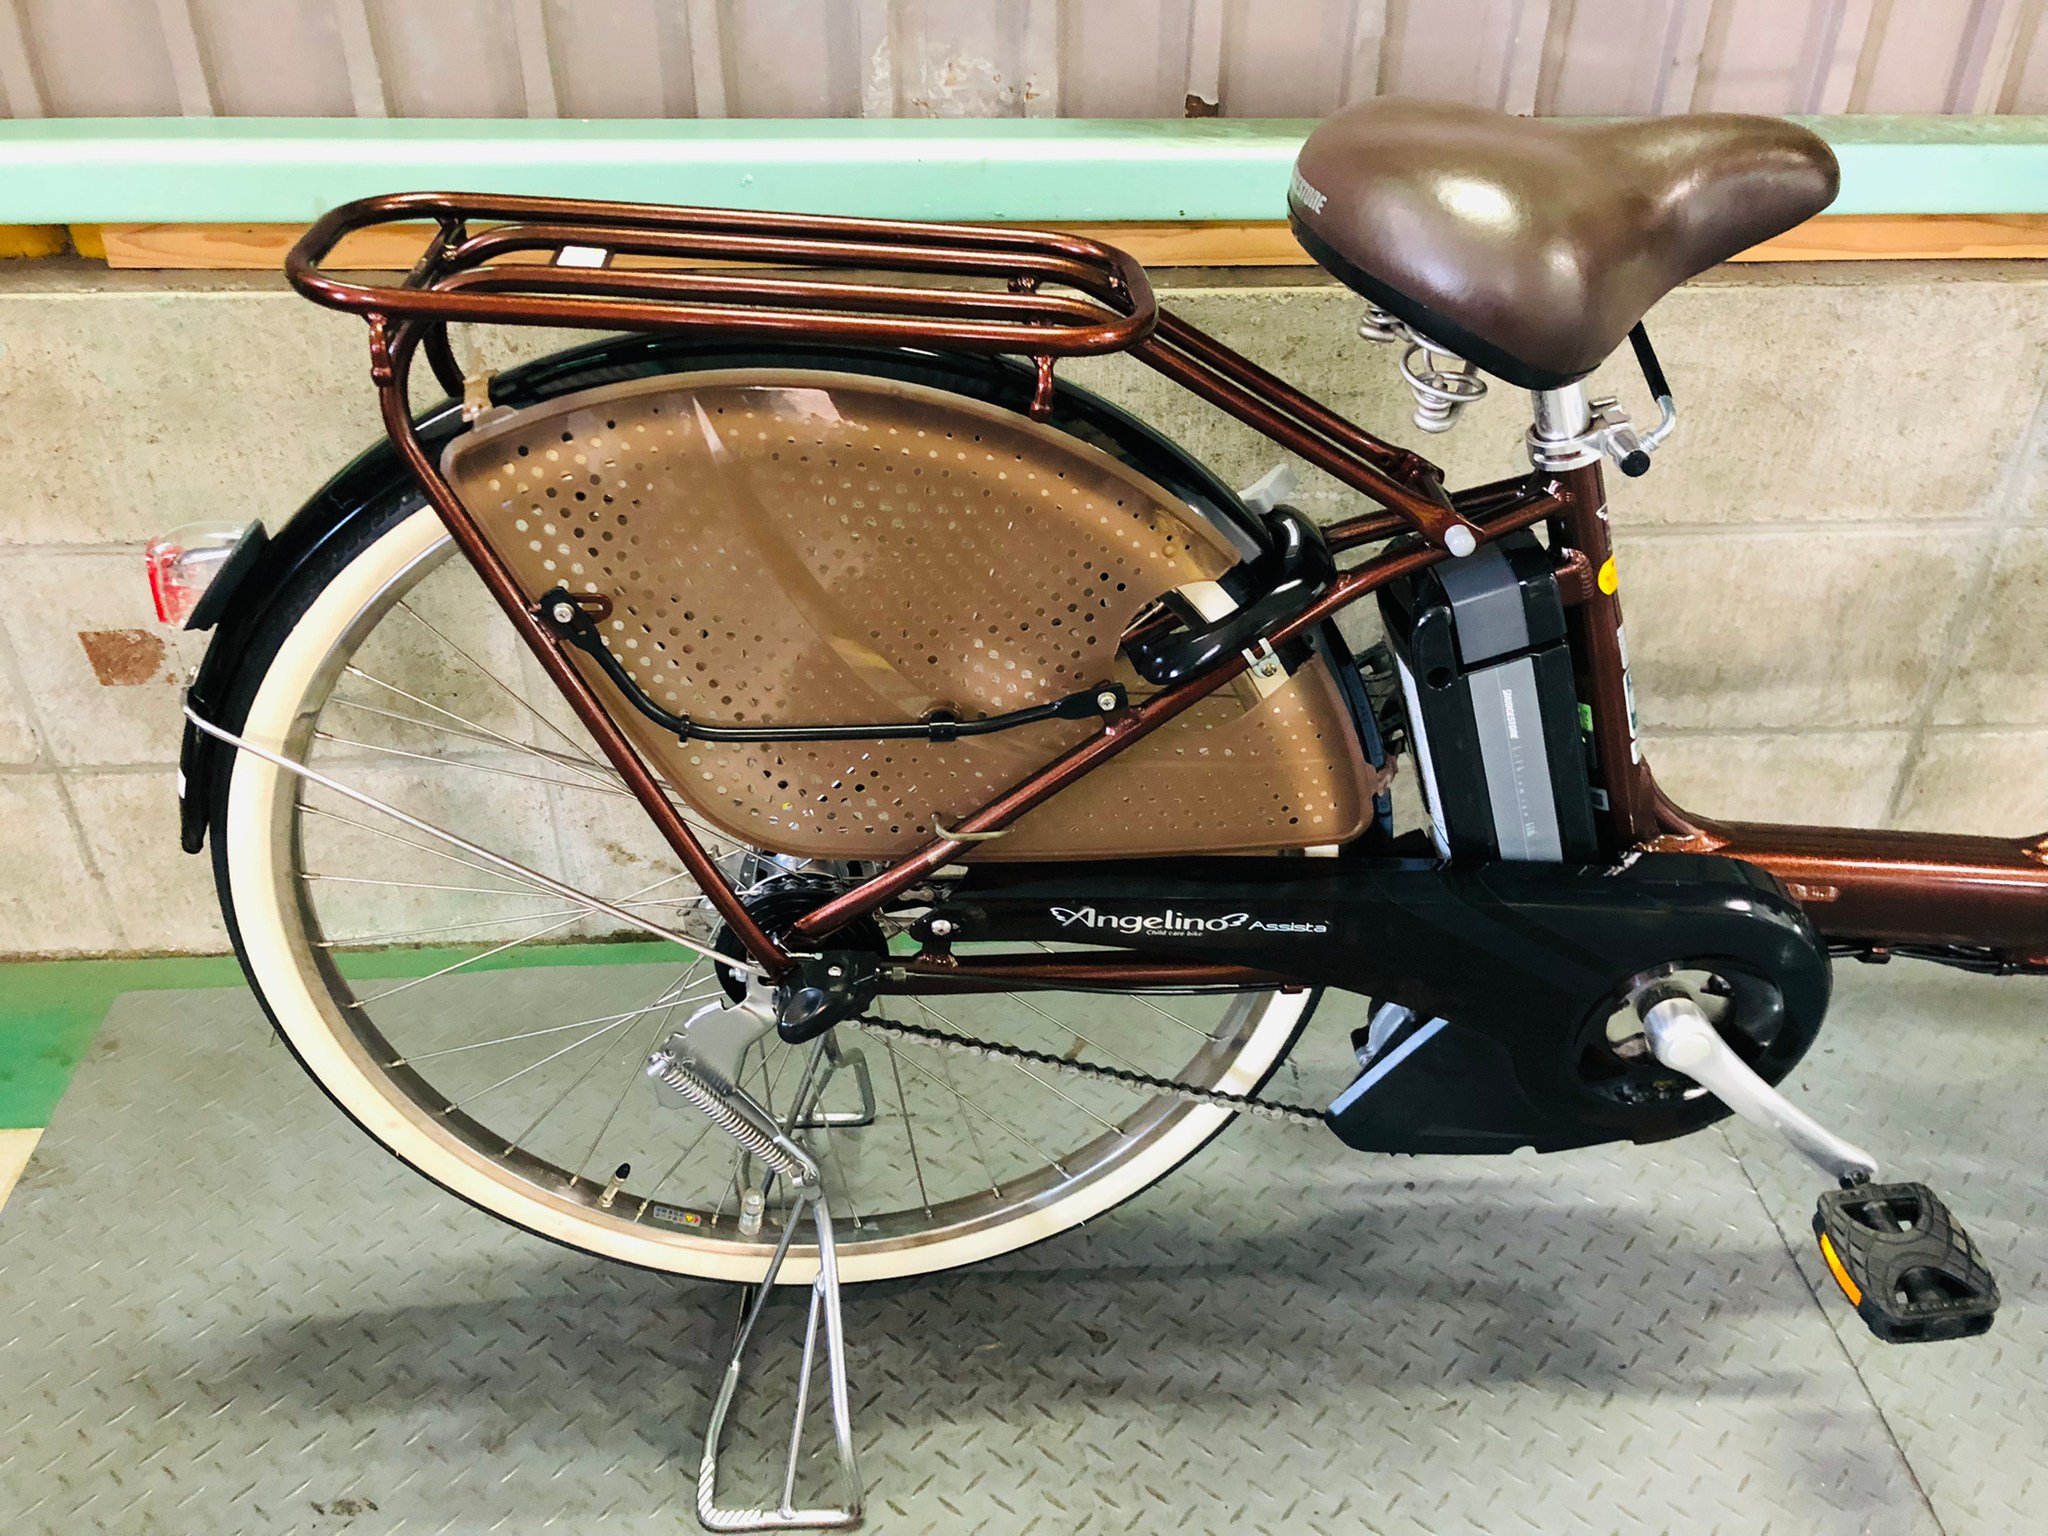 SOLD OUT】電動自転車 ブリヂストン アンジェリーノ 22/26インチ 子供乗せ 6Ah 茶色 |  国産・中古の激安電動アシスト自転車を販売MIZO COOL（ミゾクール）